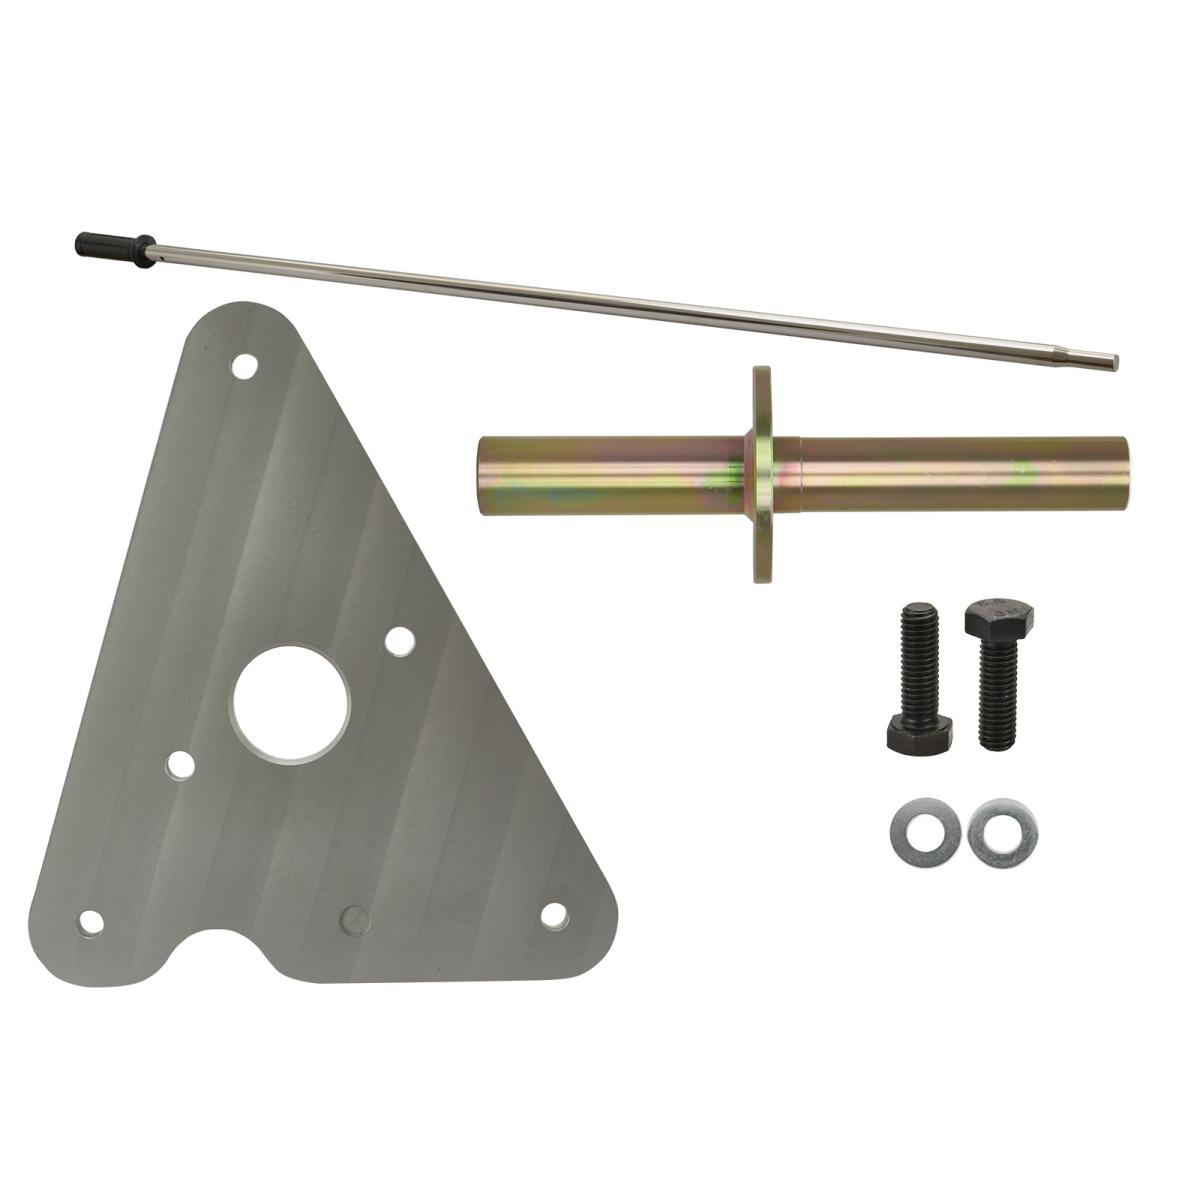 Sbt Sea-Doo Spark Engine Alignment Tool Rental Or Purchase - 80-103S - Click Image to Close